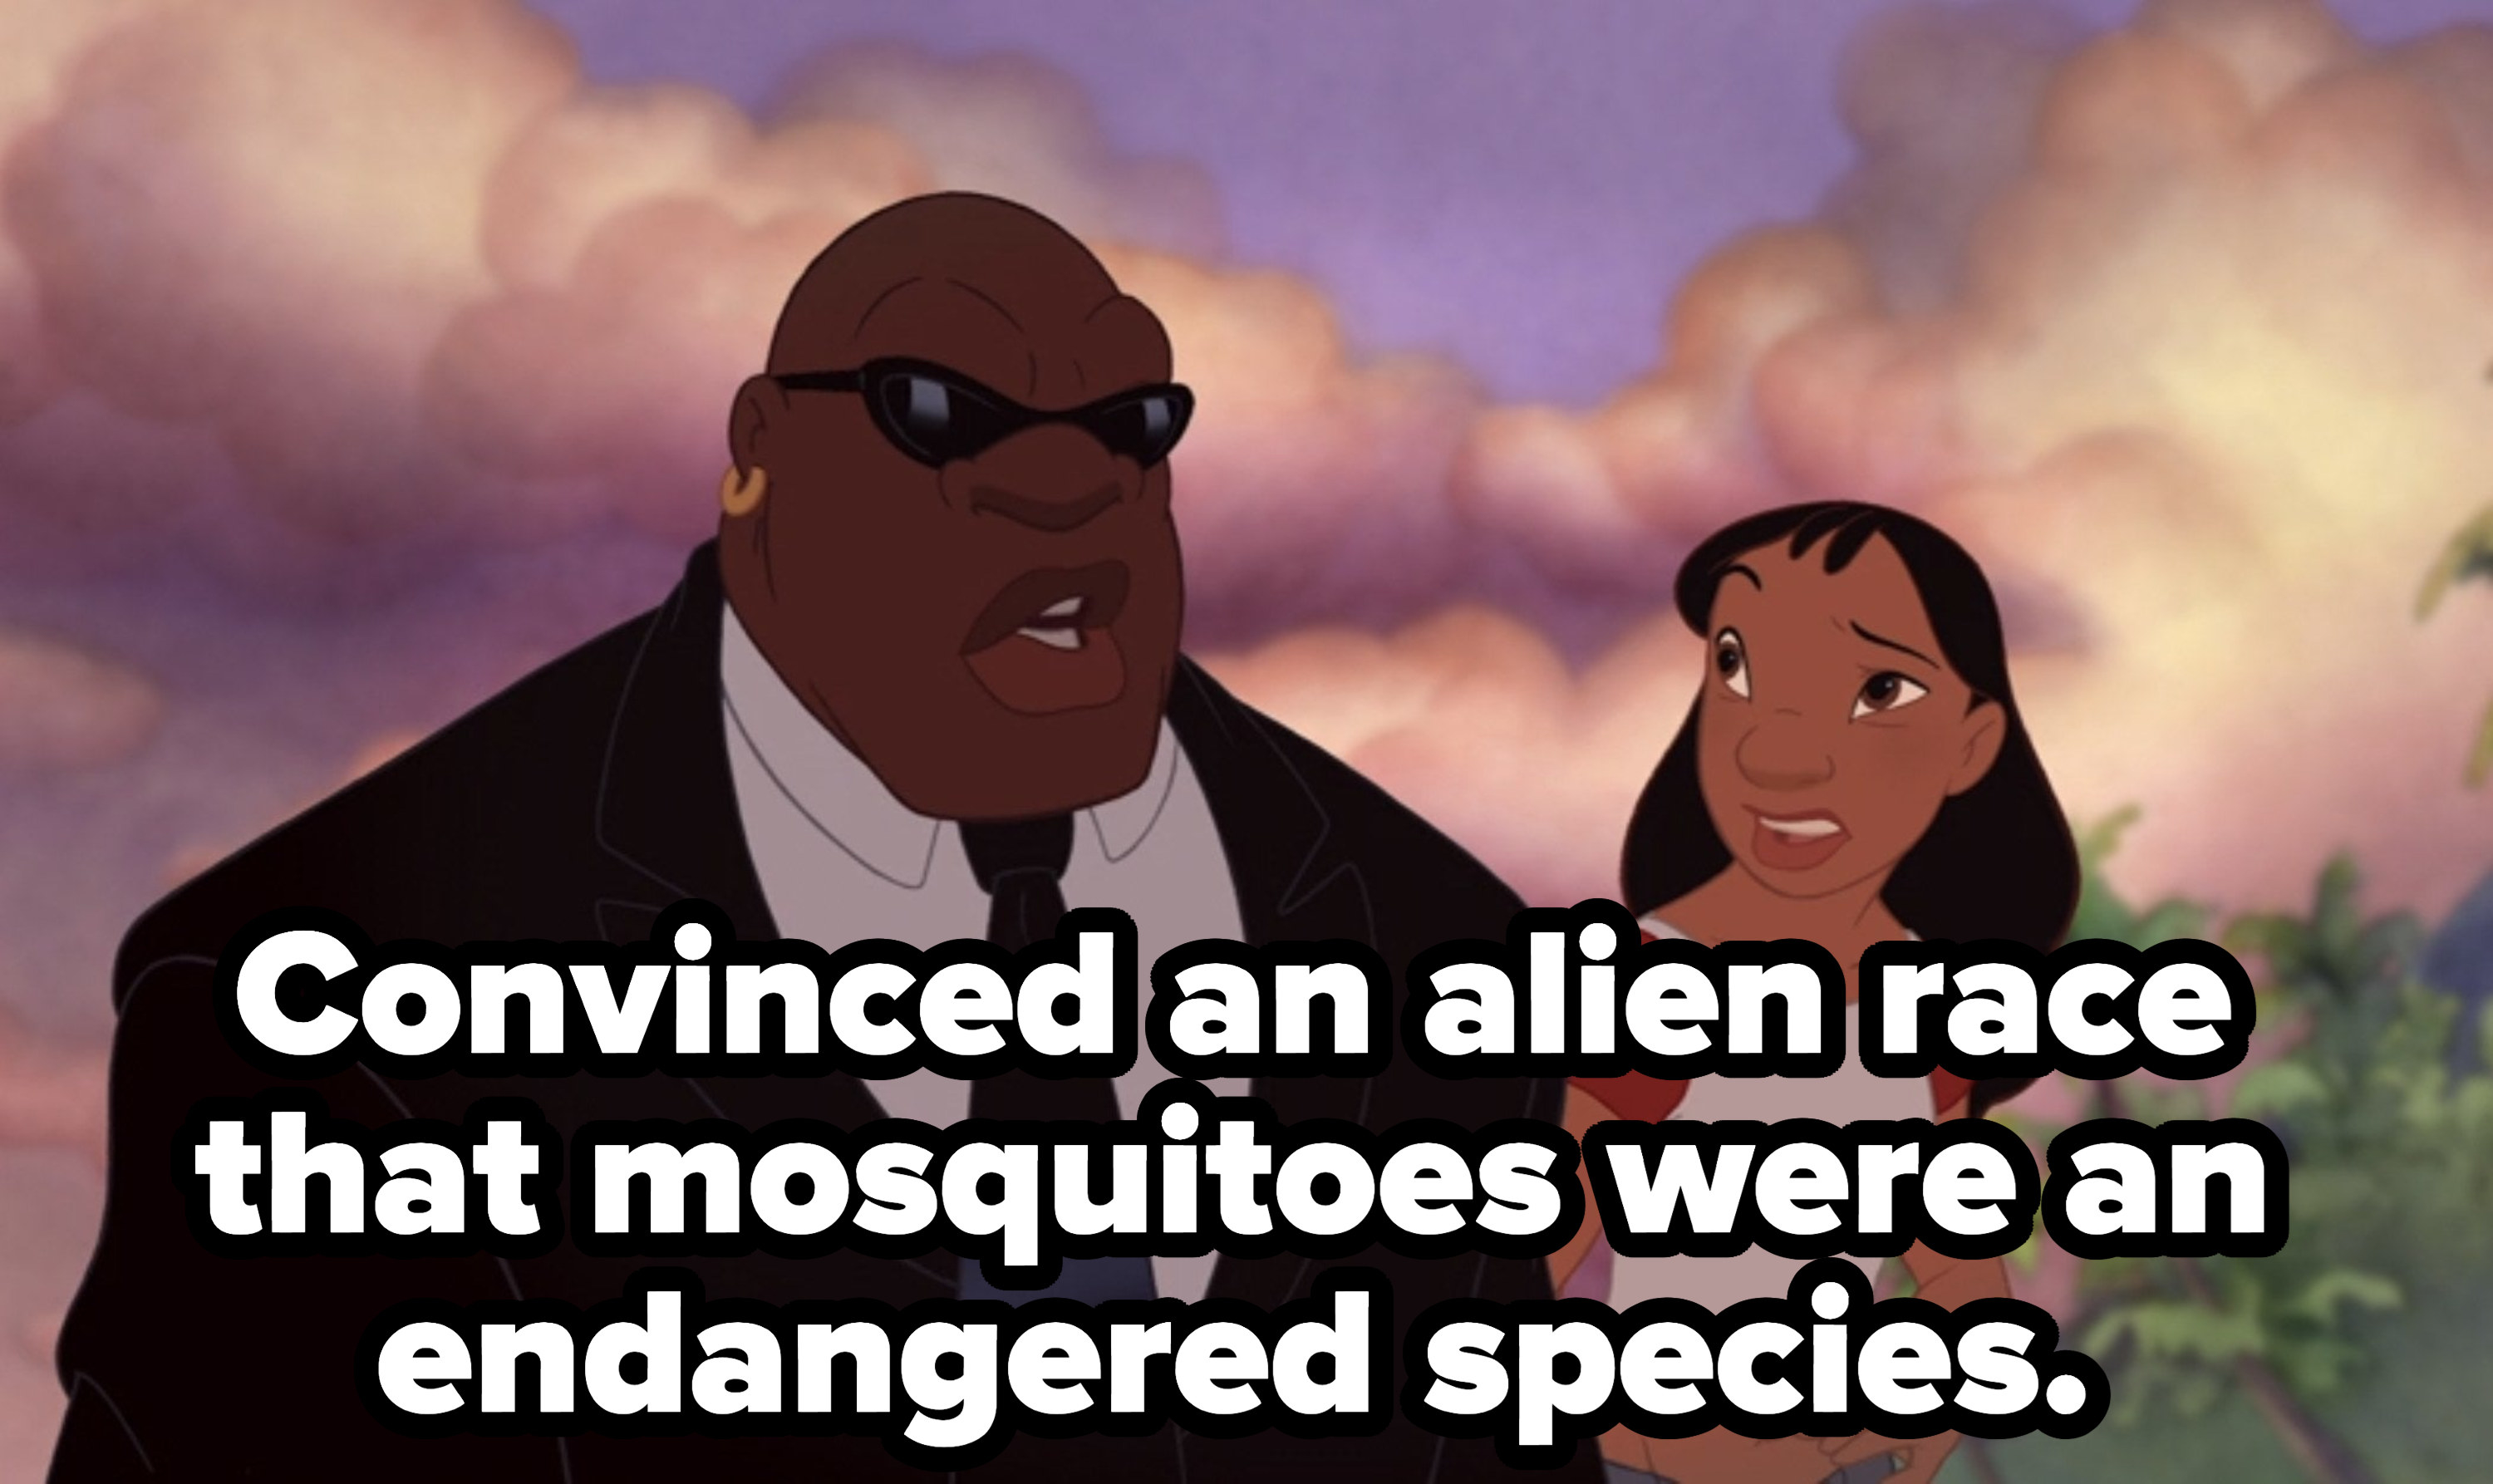 Mr Bubbles saying Convinced an alien race that mosquitoes were an endangered species